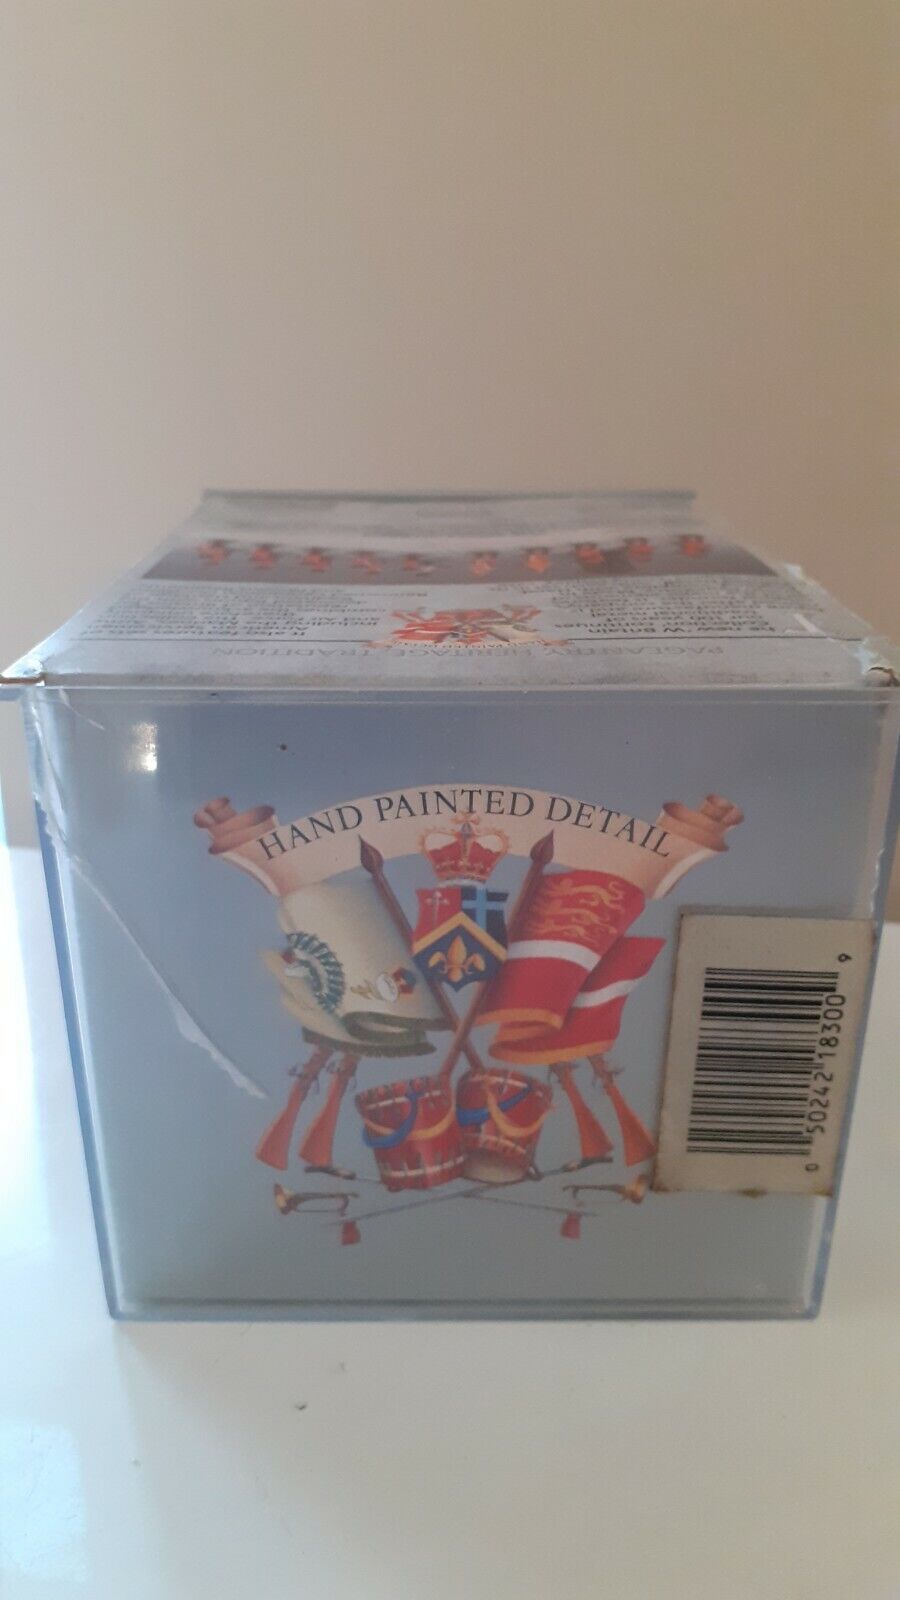 Britains ceremonial Scots guards band 1989 perspex box walthamstow 1:32